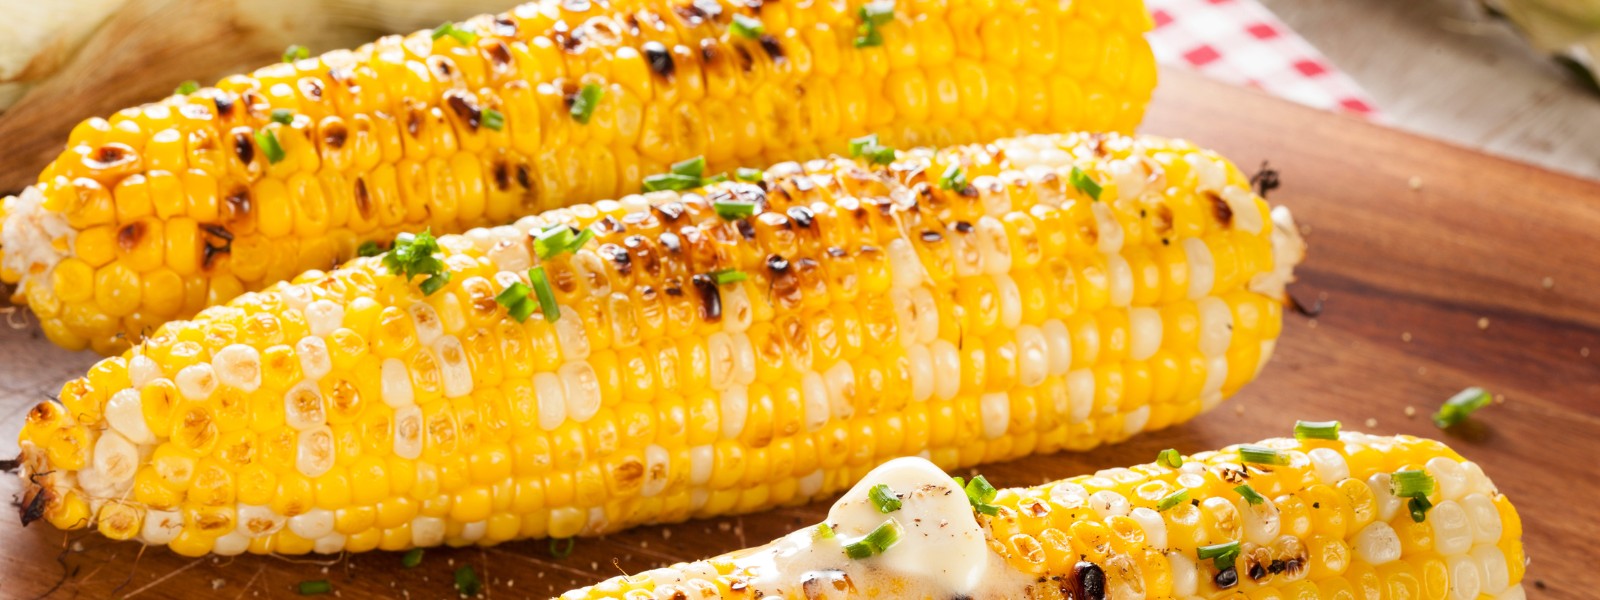 3 Corn Recipes for this Summer - Corn on the cob 3 different ways